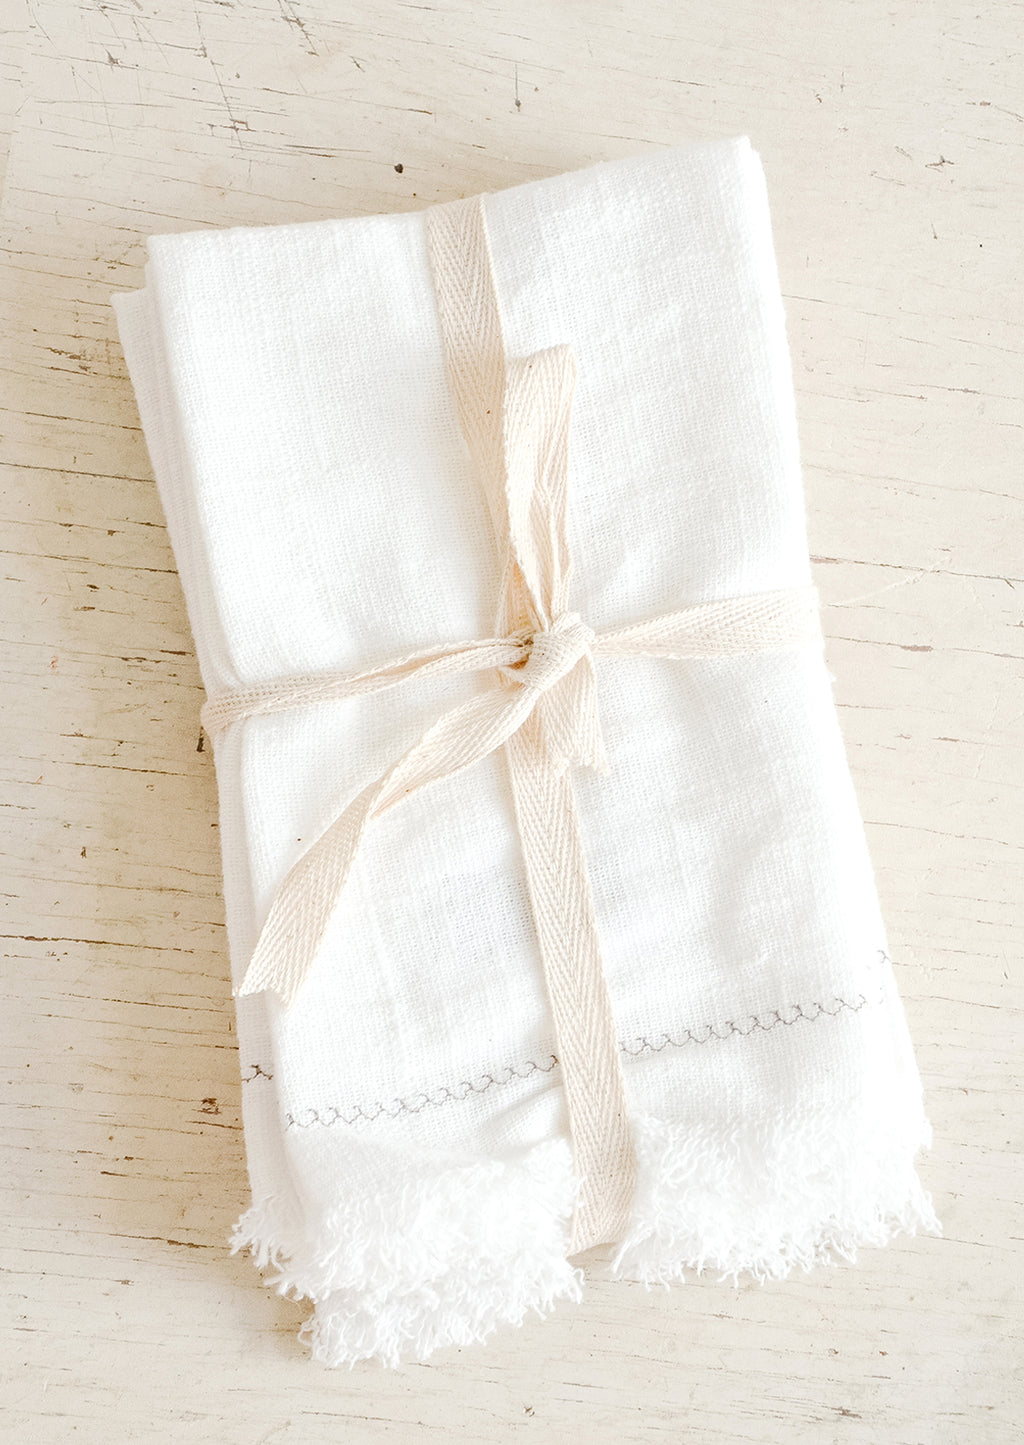 1: White cotton dinner napkins folded and bound with twine